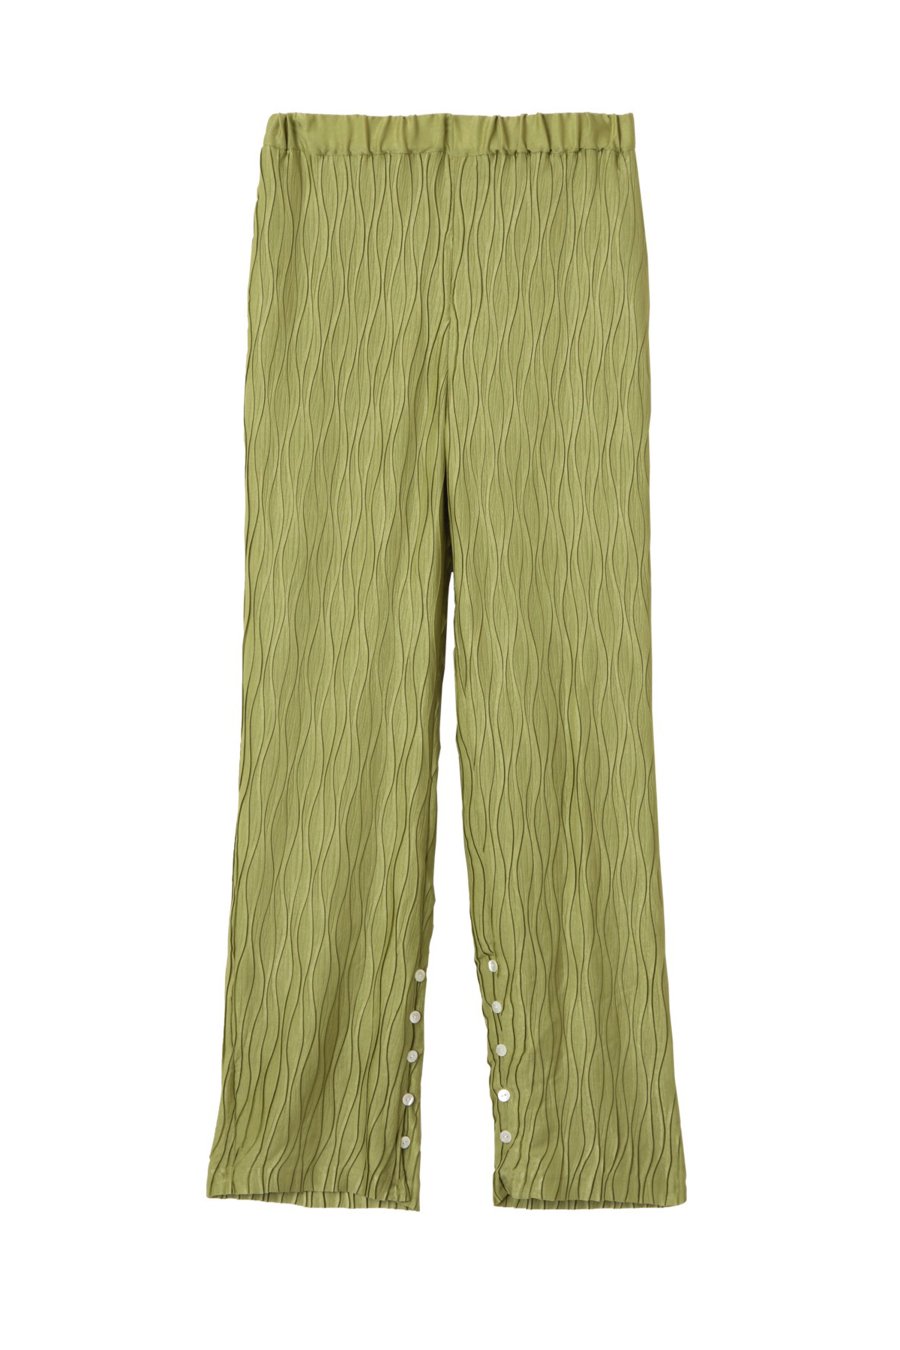 BELPER  PLEATED PANT（GREEN）<img class='new_mark_img2' src='https://img.shop-pro.jp/img/new/icons15.gif' style='border:none;display:inline;margin:0px;padding:0px;width:auto;' />